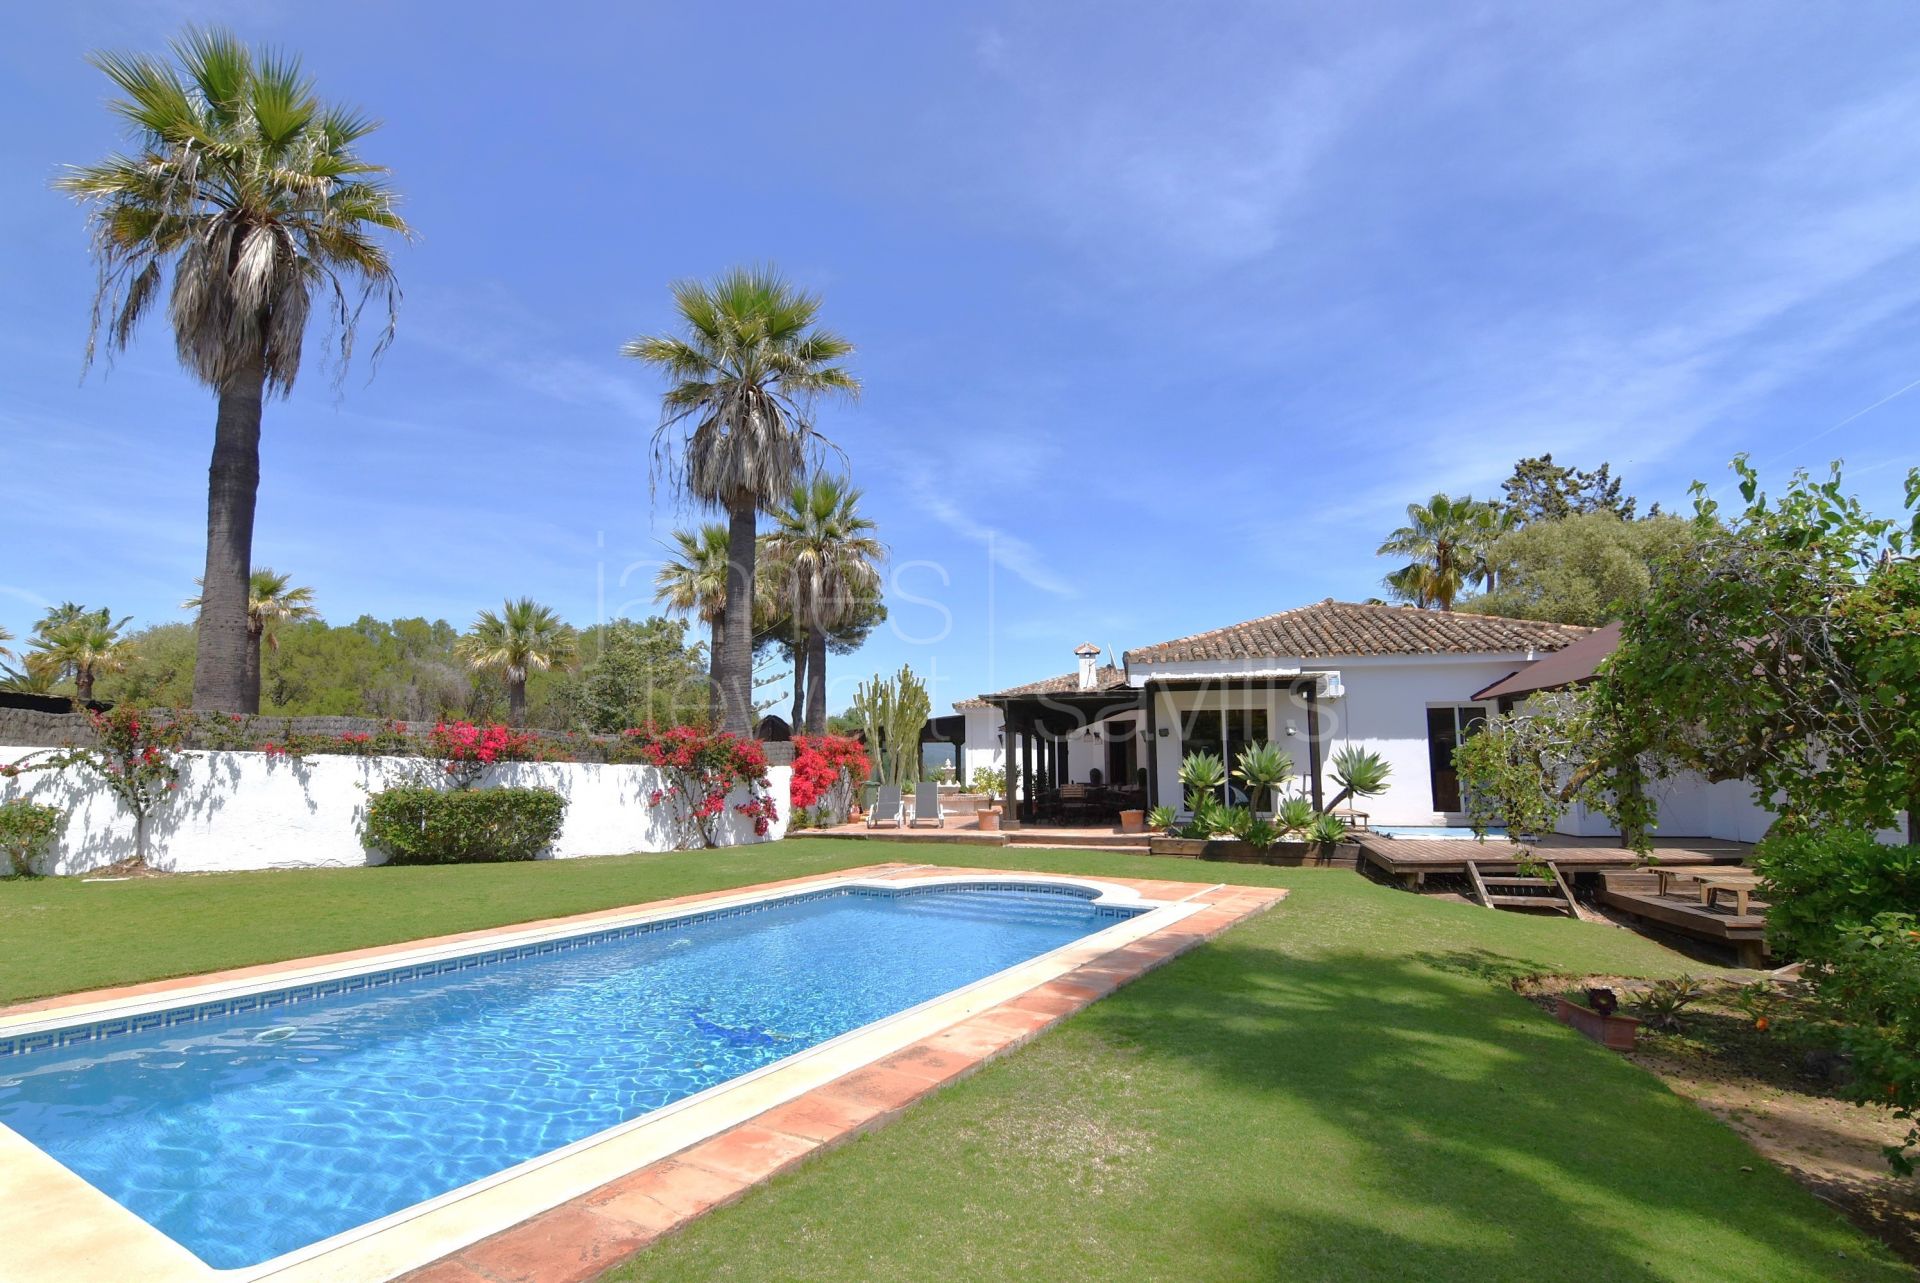 Characterful villa on 4 plots with lovely country views and guest house